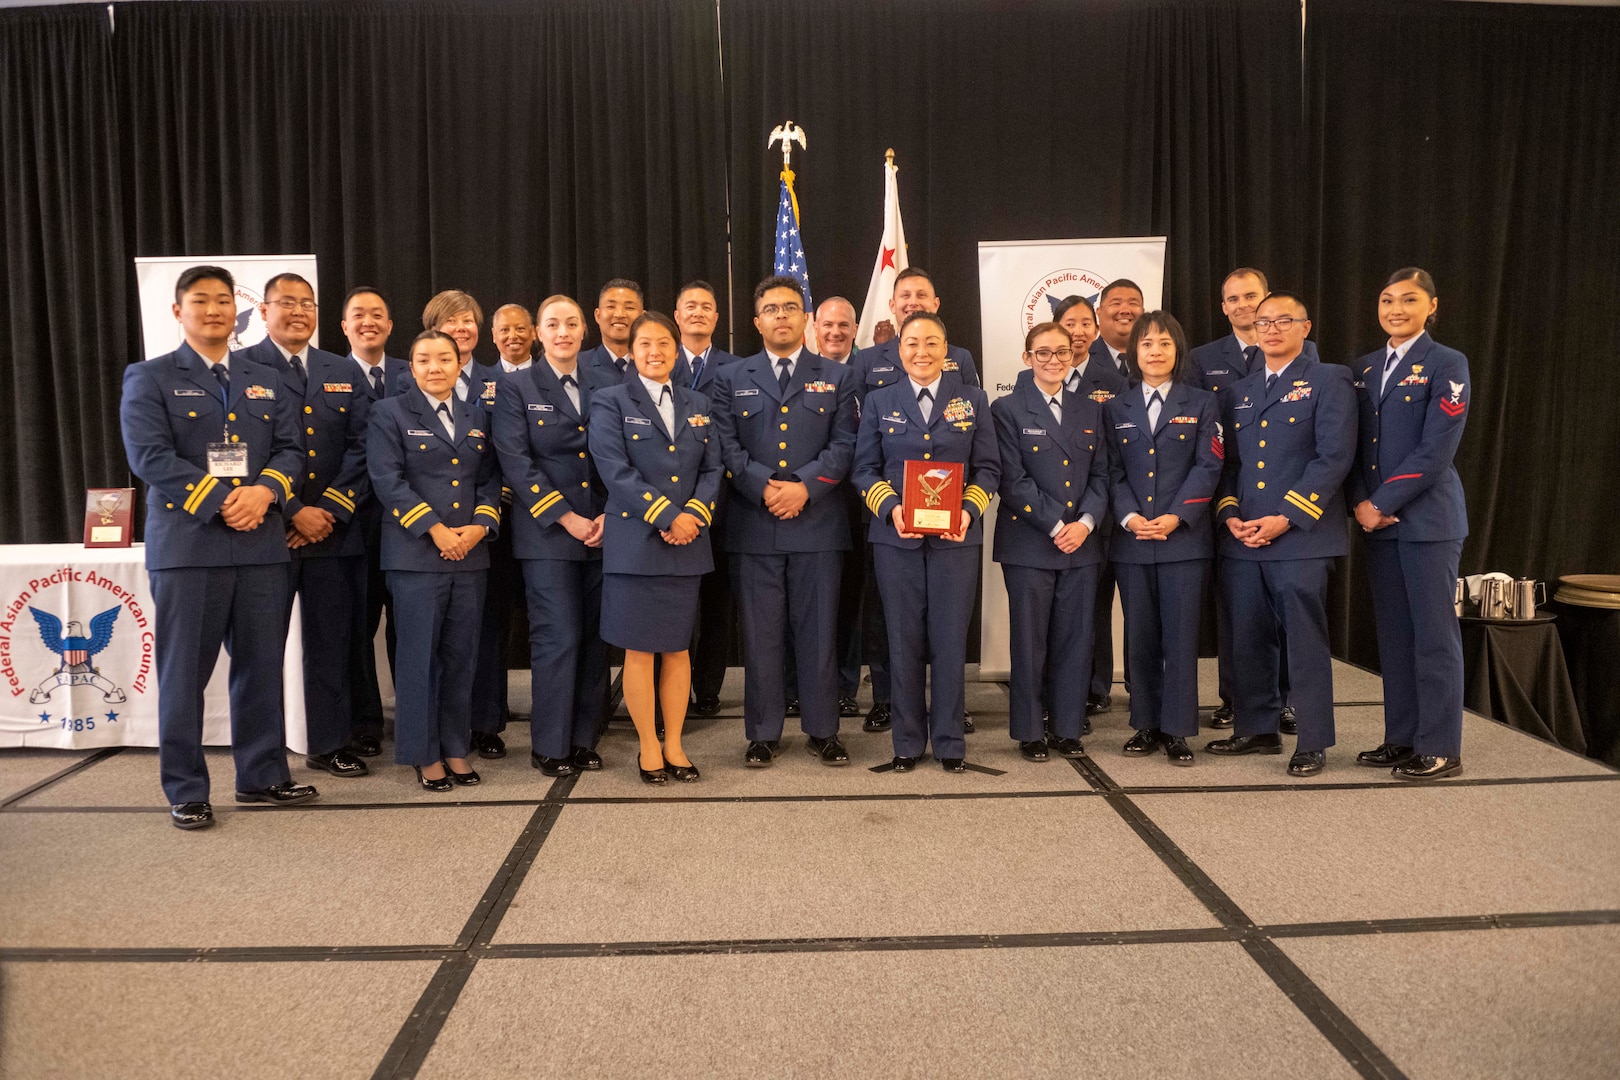 Members of the USCG Federail Asian Pacific American Council line up in two rows to pose for a picture. Capt. Eva Van Camp is in the front row holding her award.